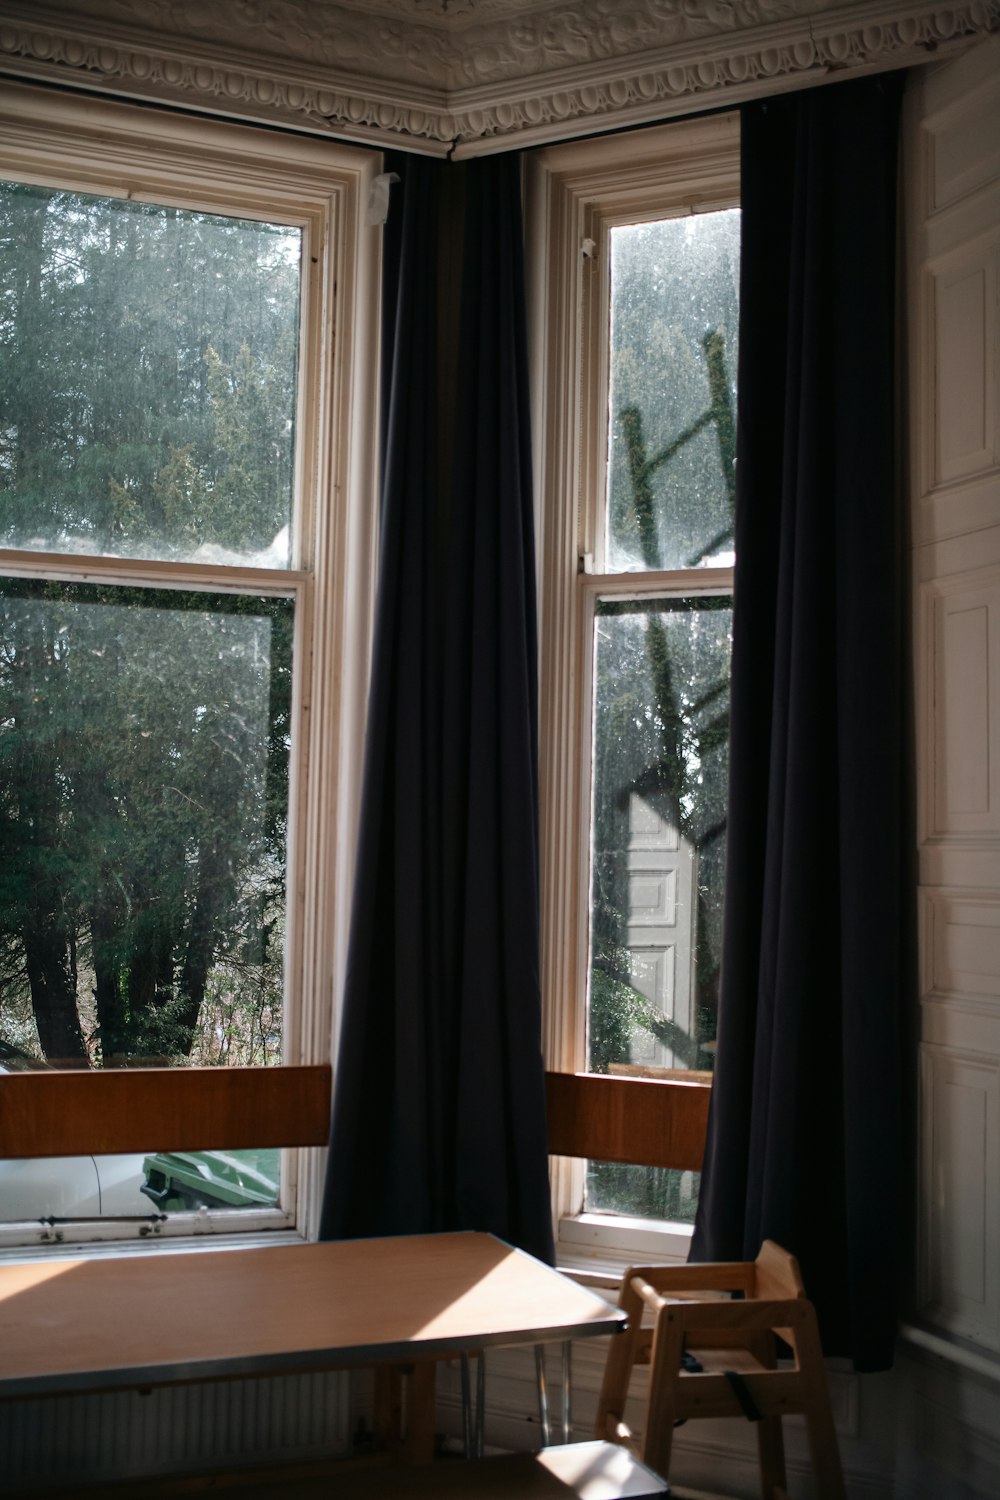 a wooden table sitting in front of a window